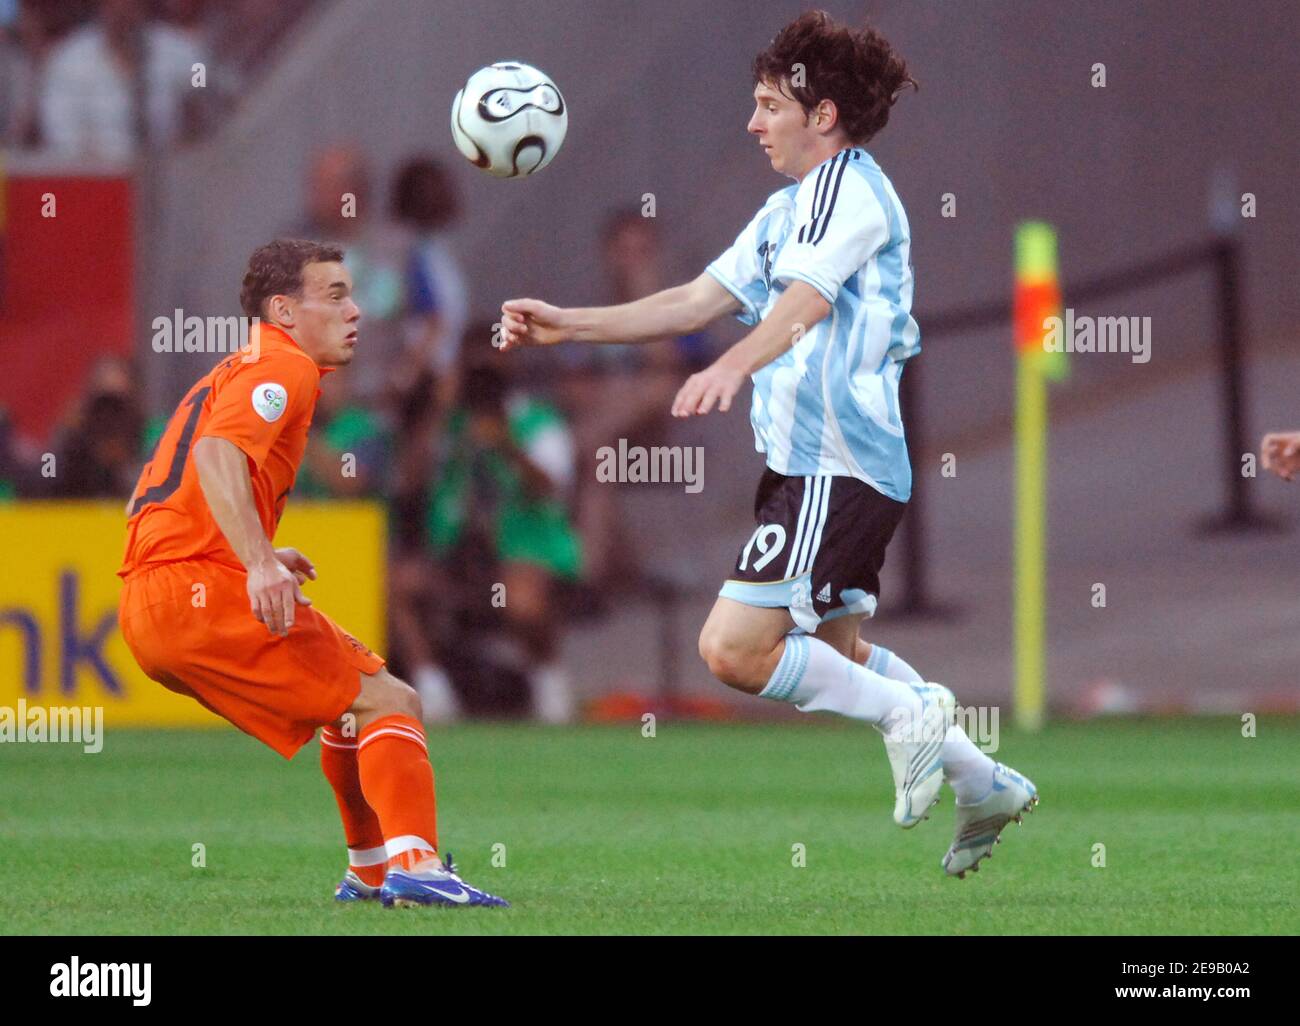 Argentina's Lionel Messi and Netherlands' Wesley Sneijder in action during the World Cup 2006, Group C, Netherlands vs Argentina at the Commerzbank-Arena Stadium in Frankfurt, Germany on June 21, 2006. The match ended in 0-0 draw. Photo by Gouhier-Hahn-Orban/Cameleon/ABACAPRESS.COM Stock Photo